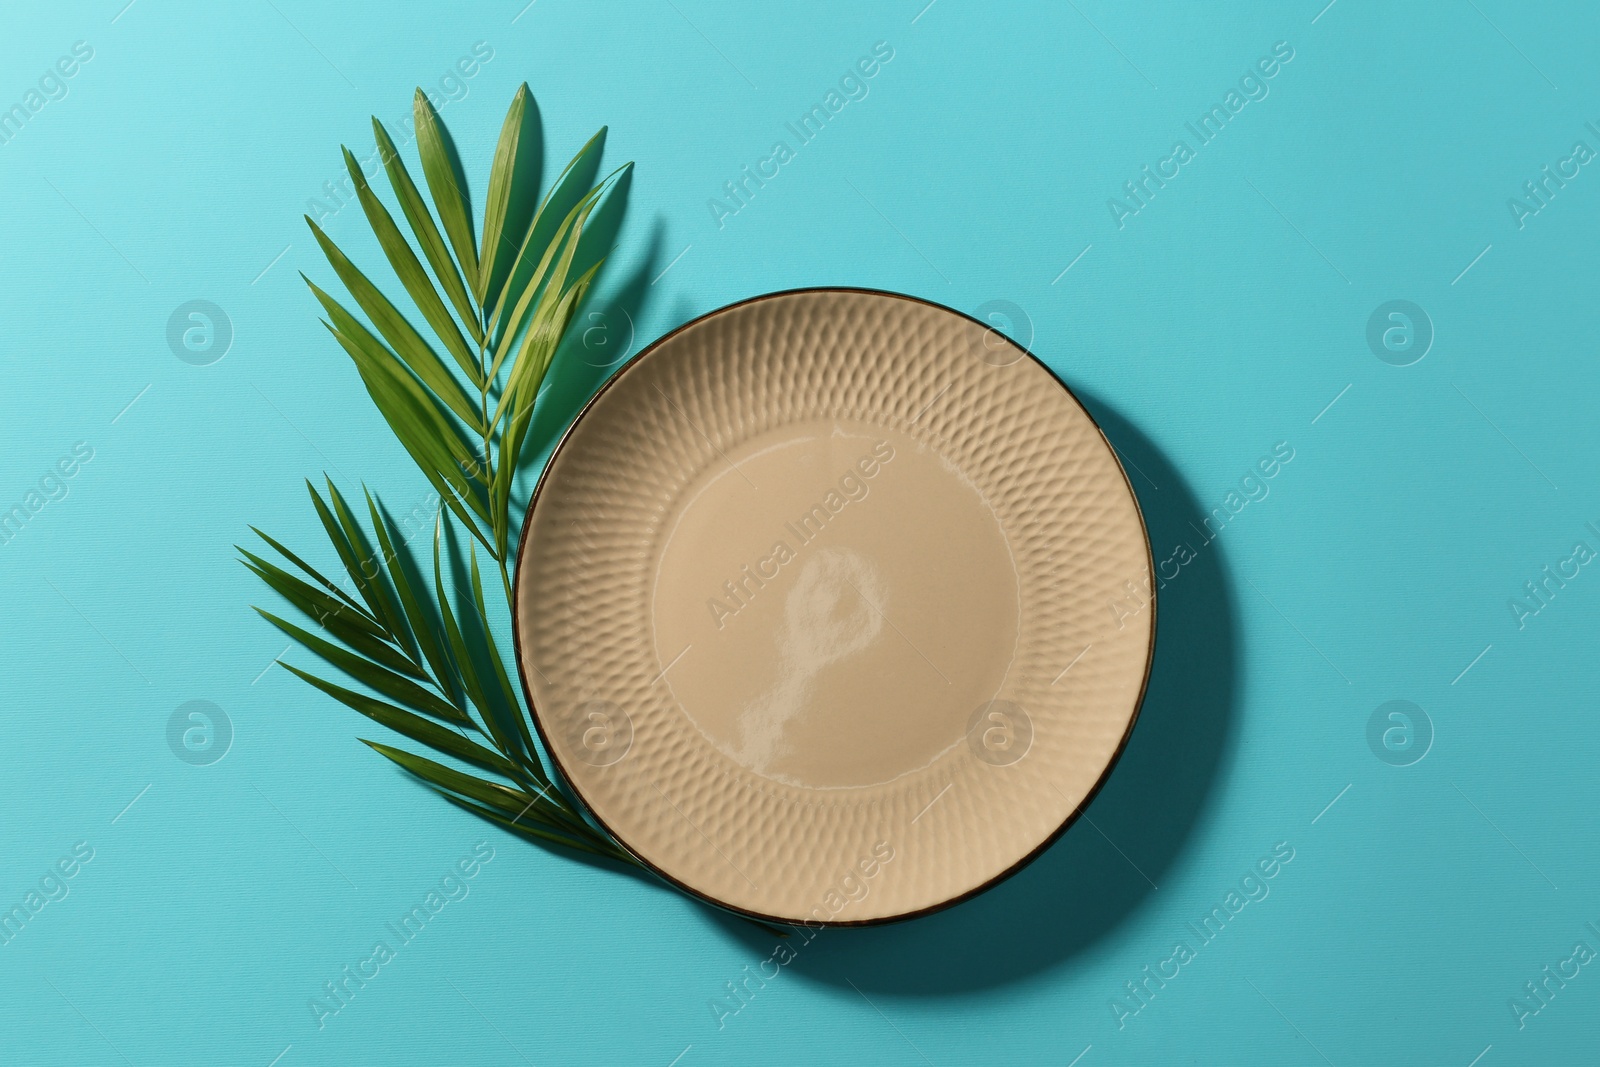 Photo of Ceramic plate and green leaves on turquoise background, flat lay